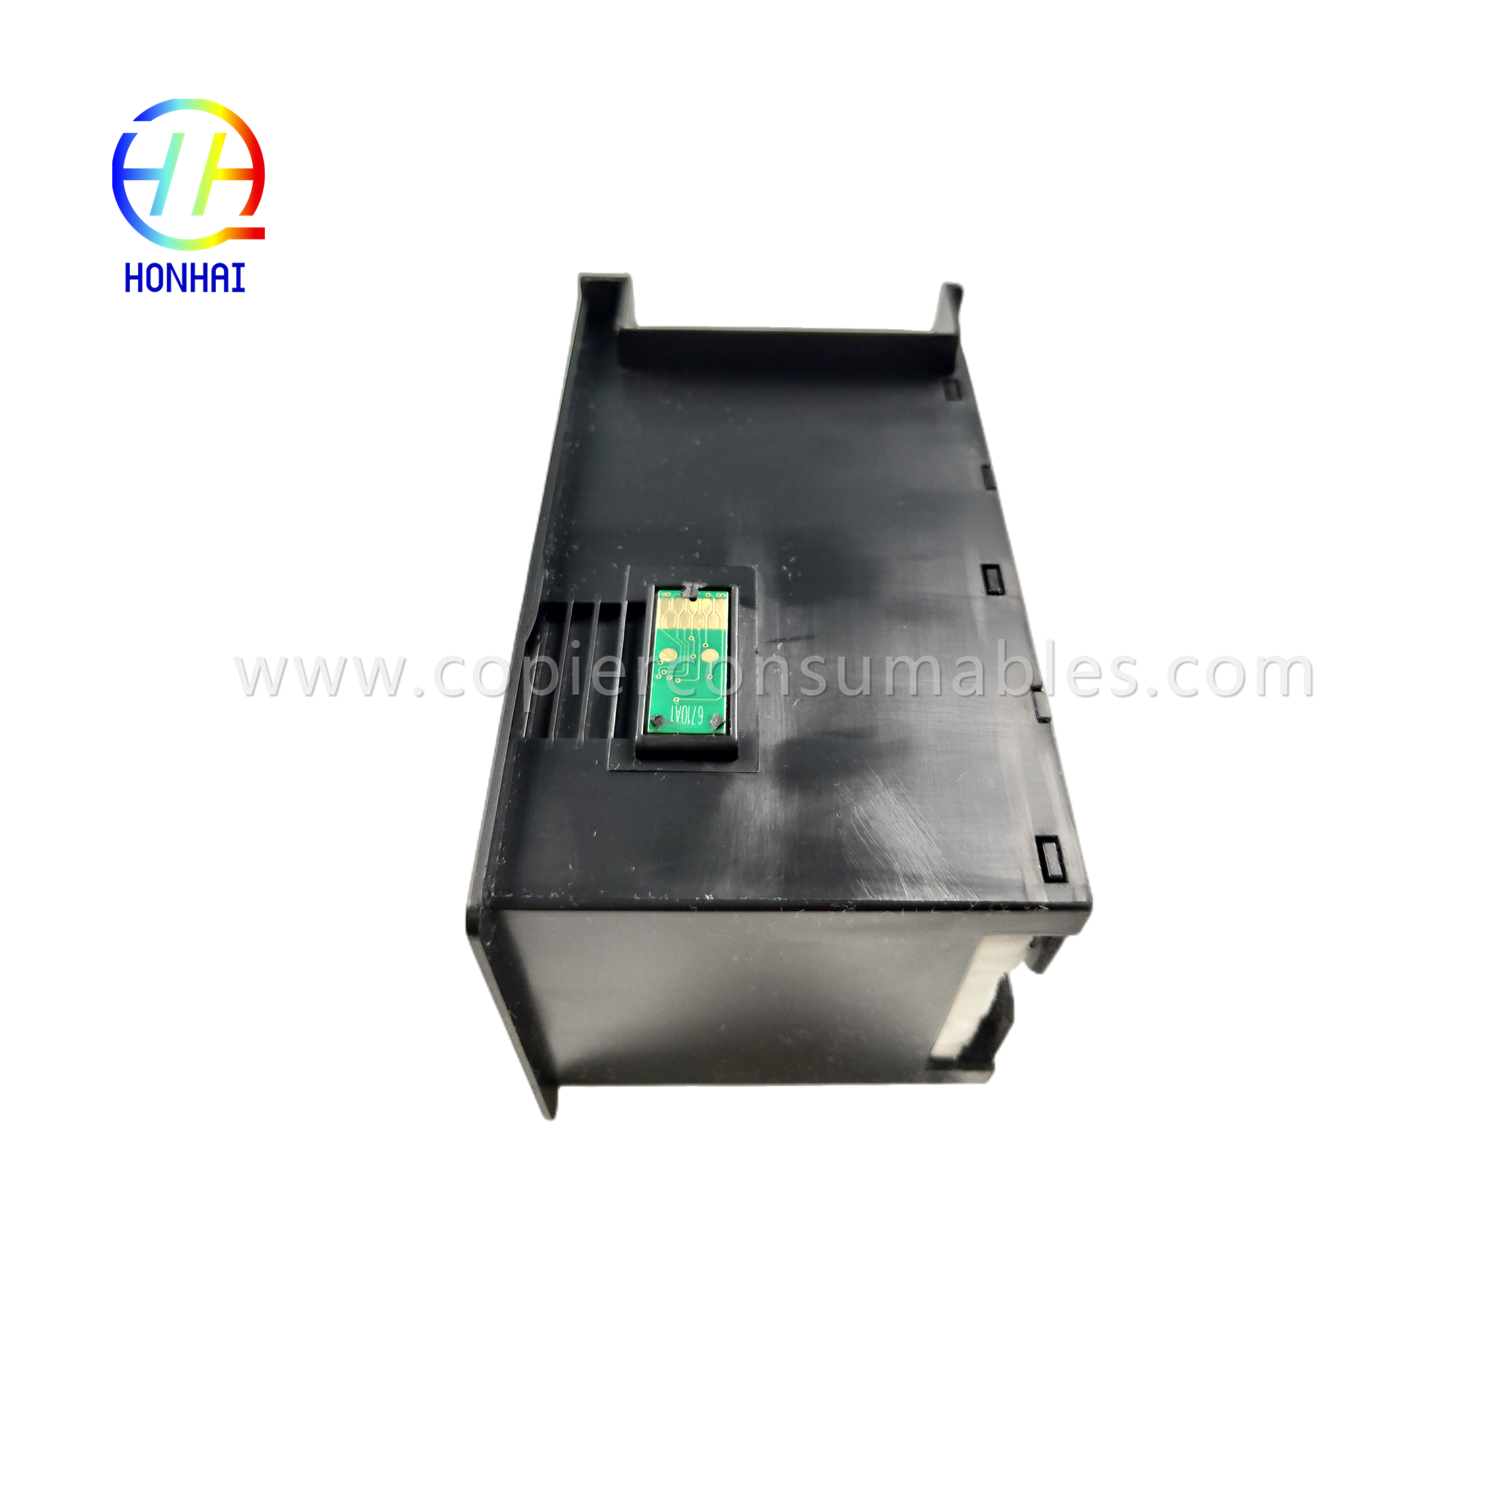 https://www.copierconsumables.com/waste-box-for-epson-workforce-wp-4535-4540-4545-4590-4595-m4015-m4095-m4525-m4595-t6710-ngwaahịa/